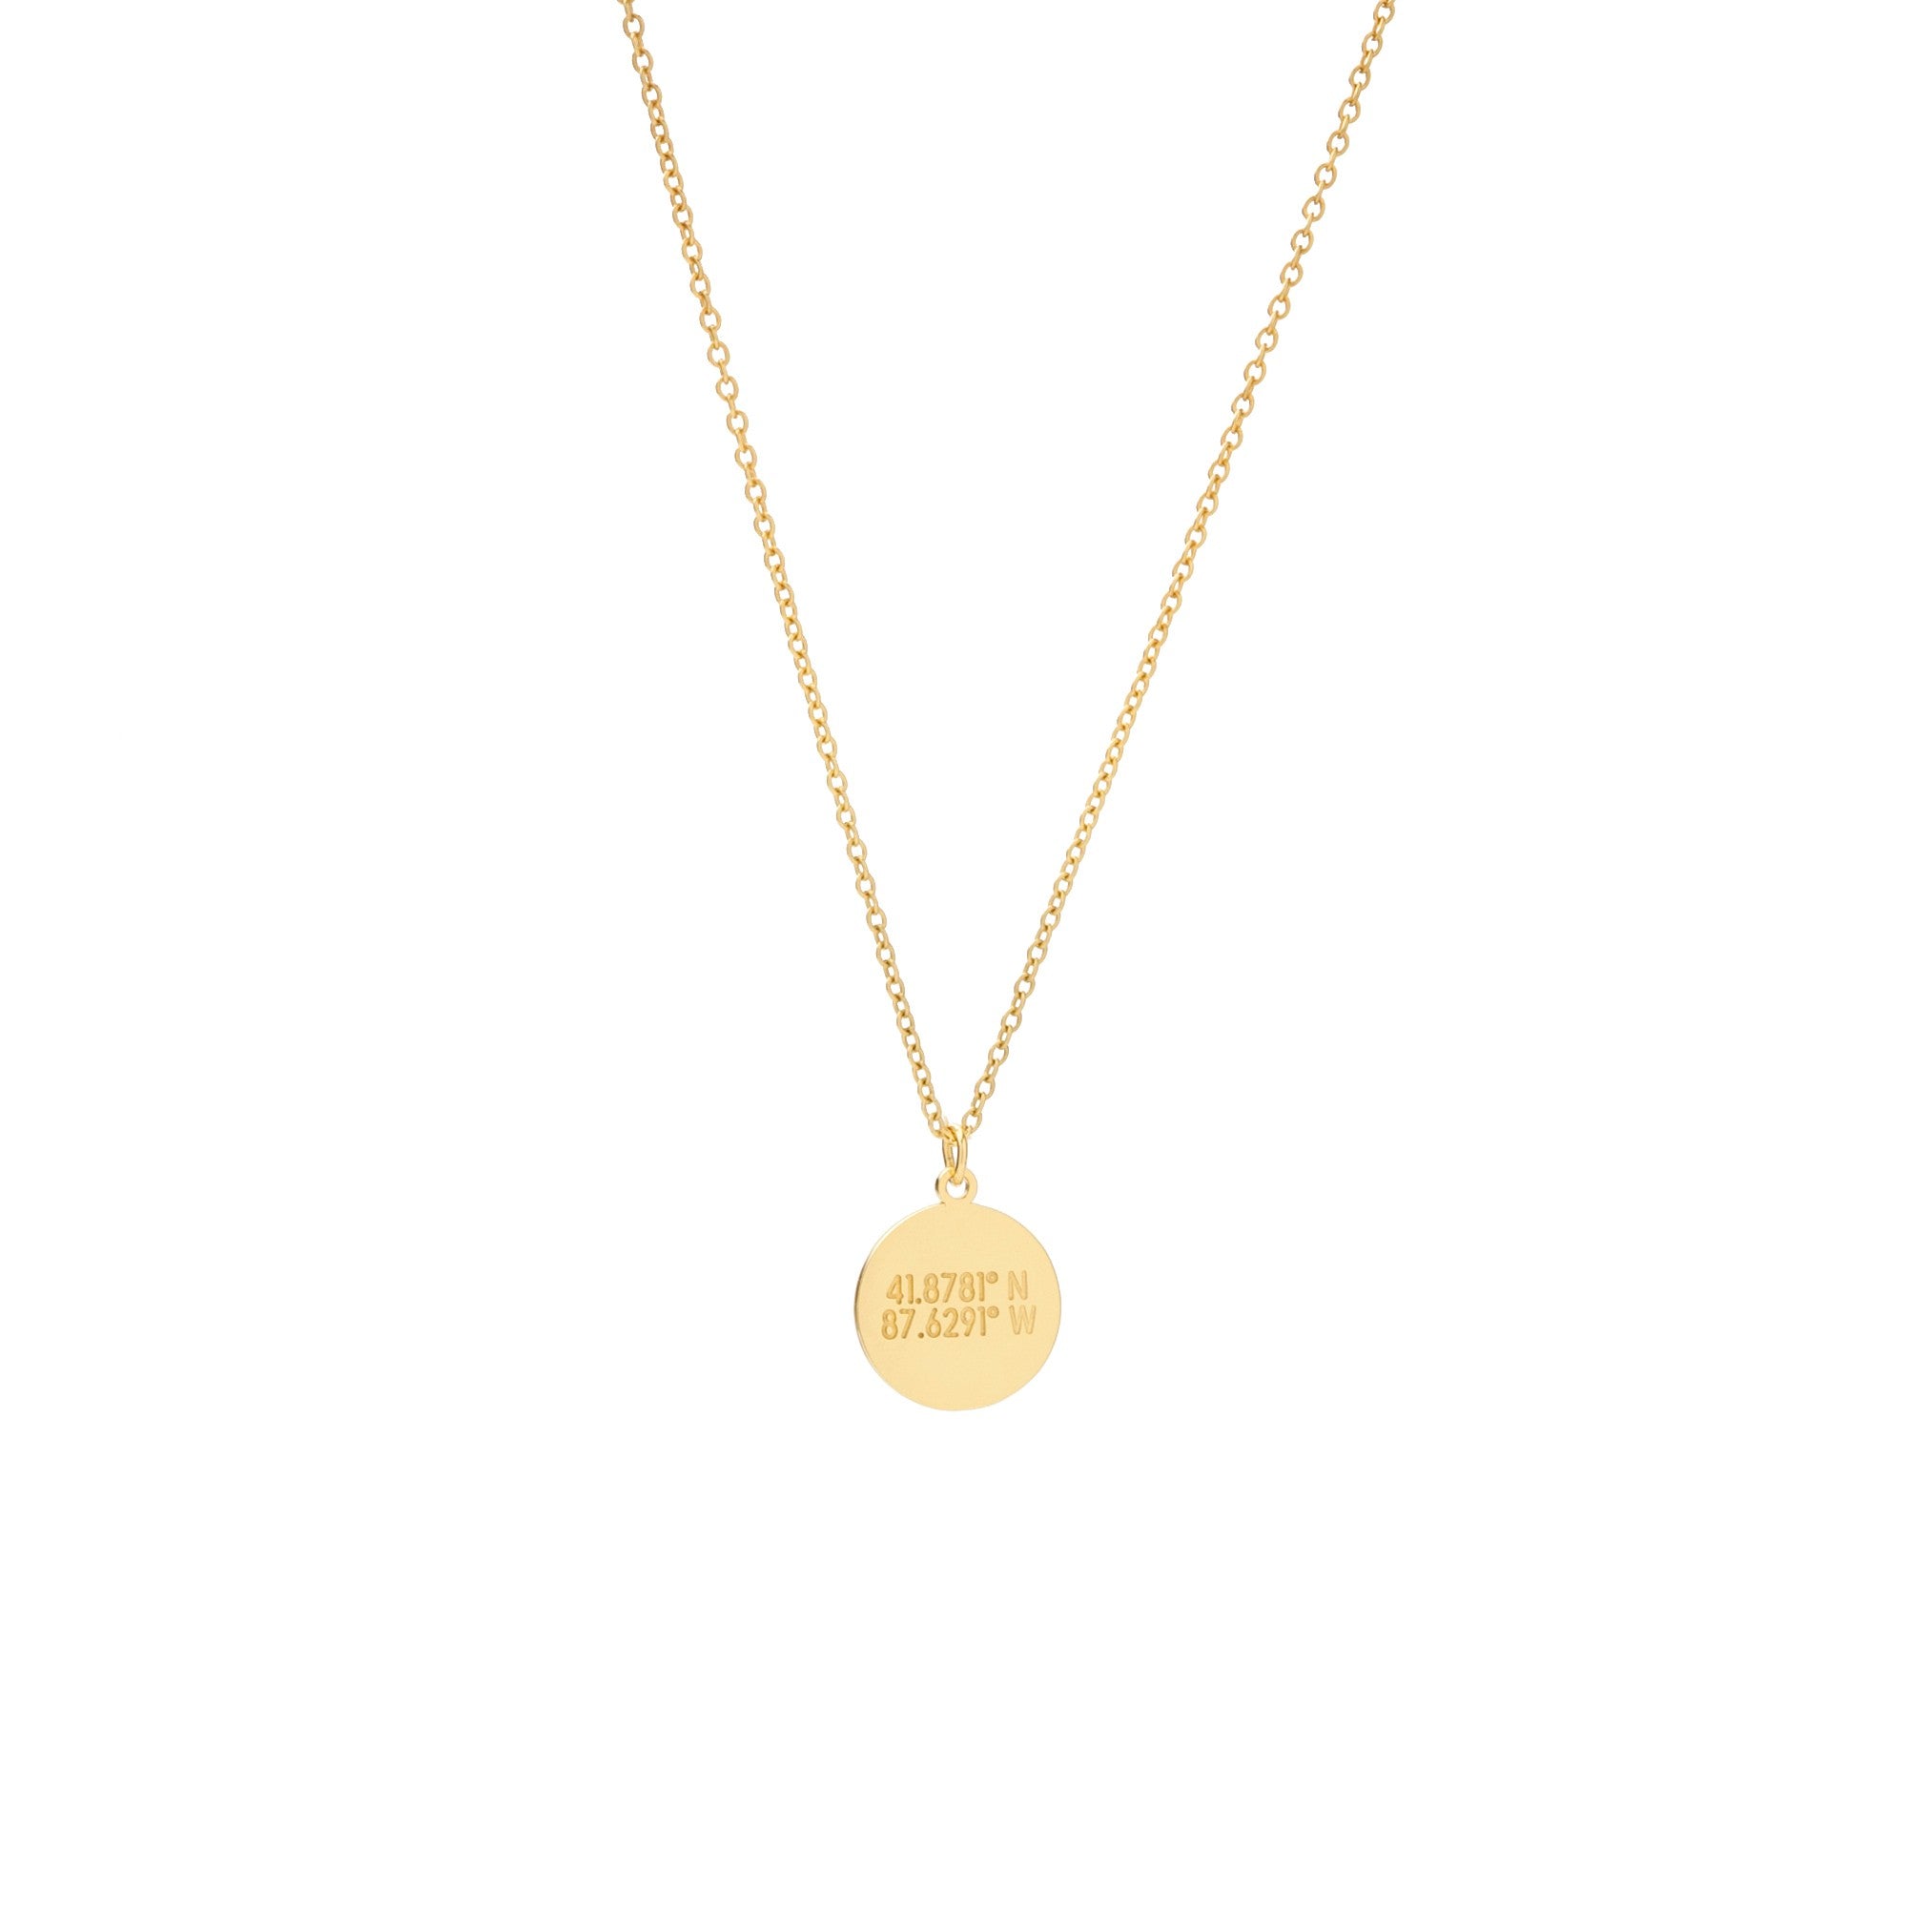 A smal flat circular gold pendant with inscription on a gold chain